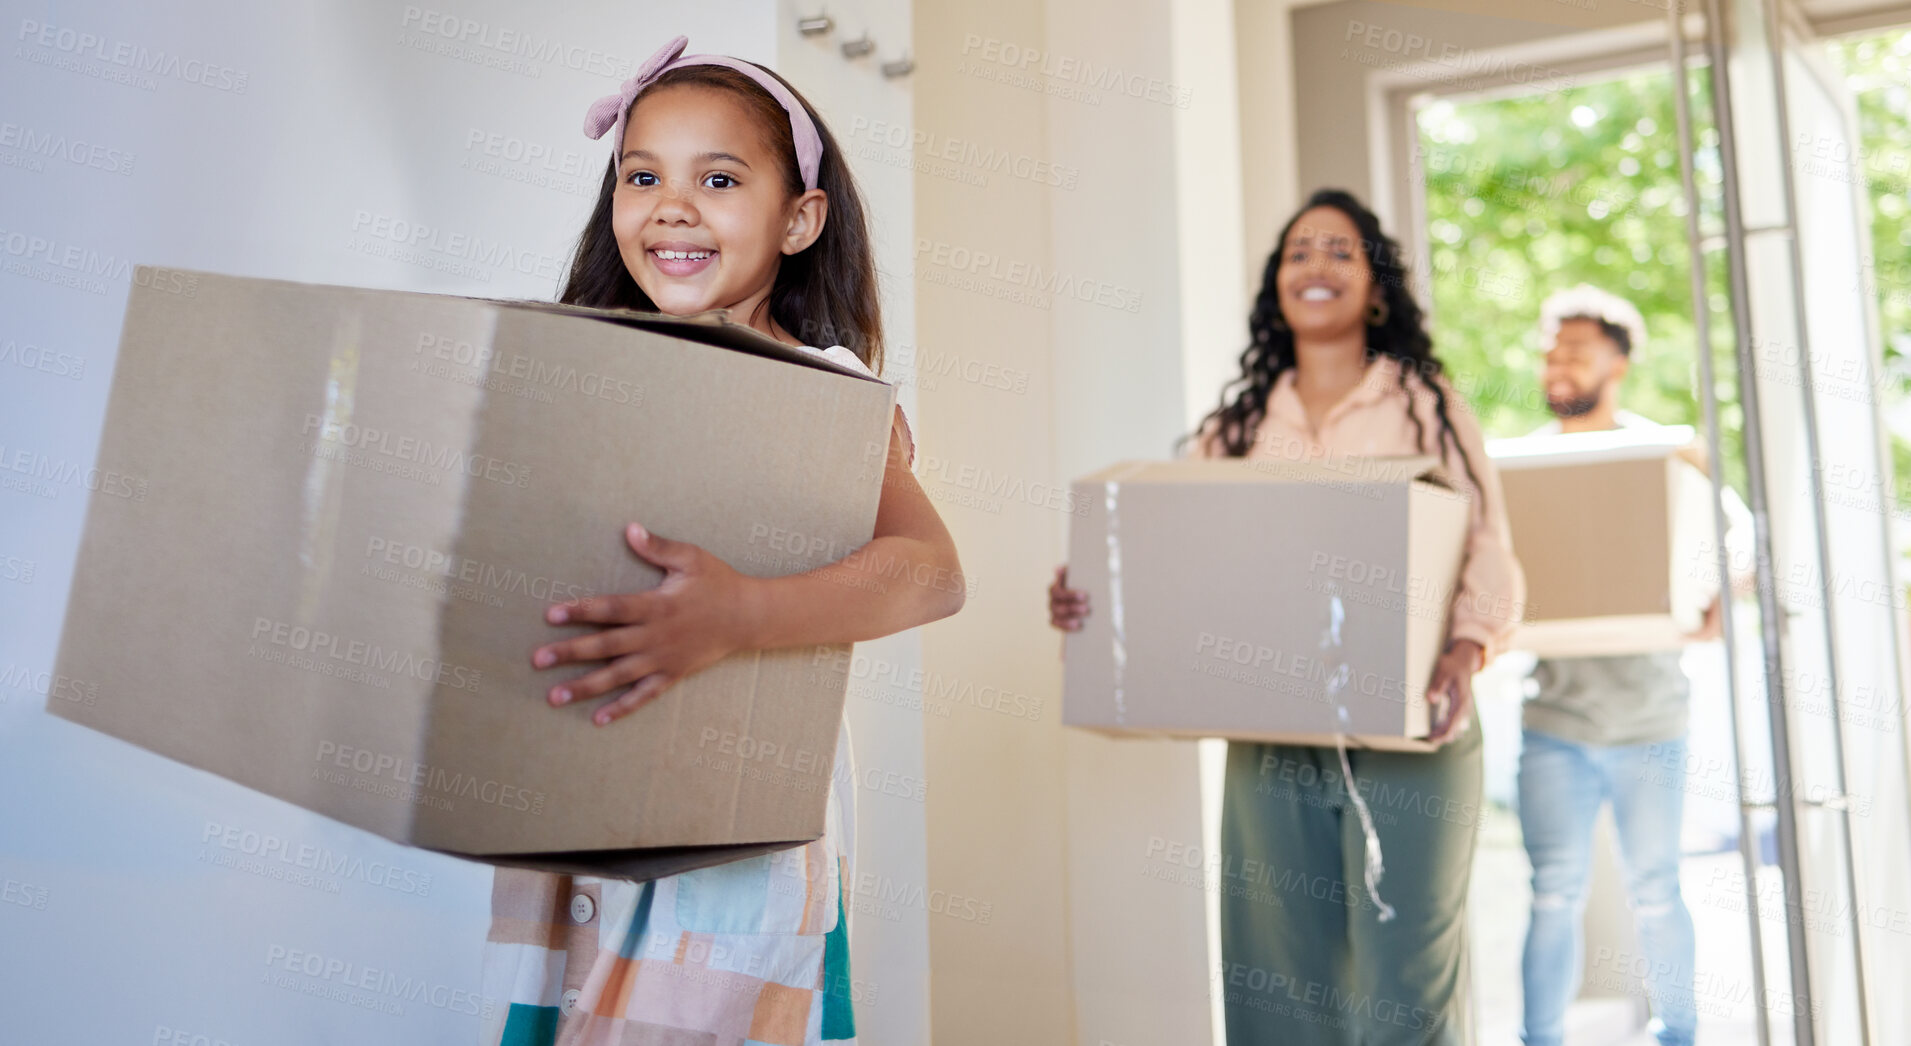 Buy stock photo Happy family, real estate and box moving in new home for property, mortgage loan or investment. Mother, father and child with smile, walking and carrying boxes for relocation or renovation in house